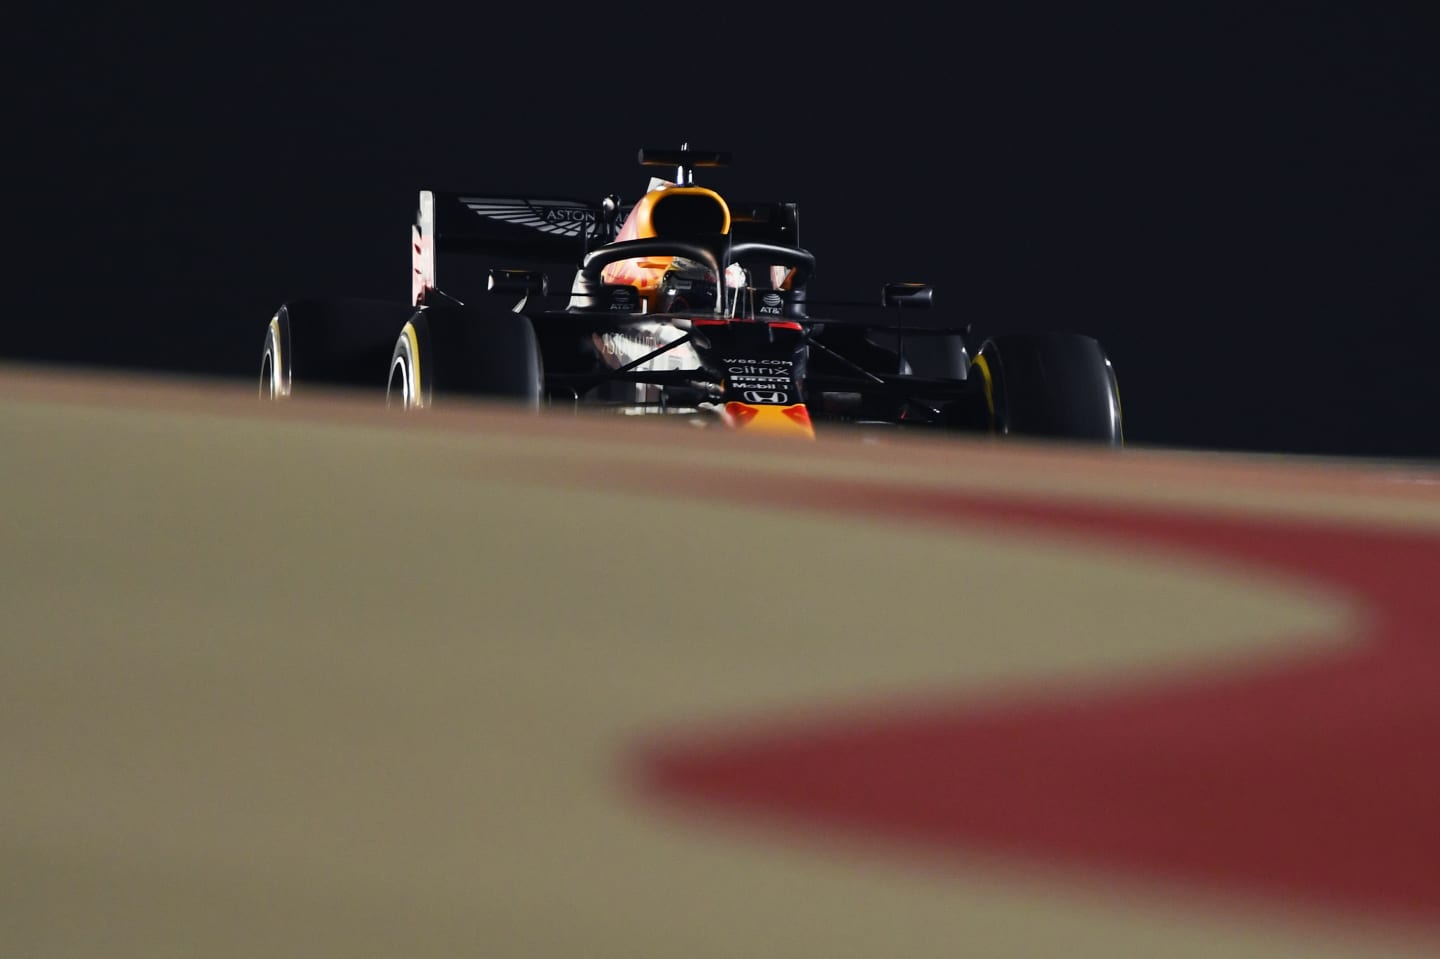 BAHRAIN, BAHRAIN - NOVEMBER 27: Max Verstappen of the Netherlands driving the (33) Aston Martin Red Bull Racing RB16 on track during practice ahead of the F1 Grand Prix of Bahrain at Bahrain International Circuit on November 27, 2020 in Bahrain, Bahrain. (Photo by Rudy Carezzevoli/Getty Images)